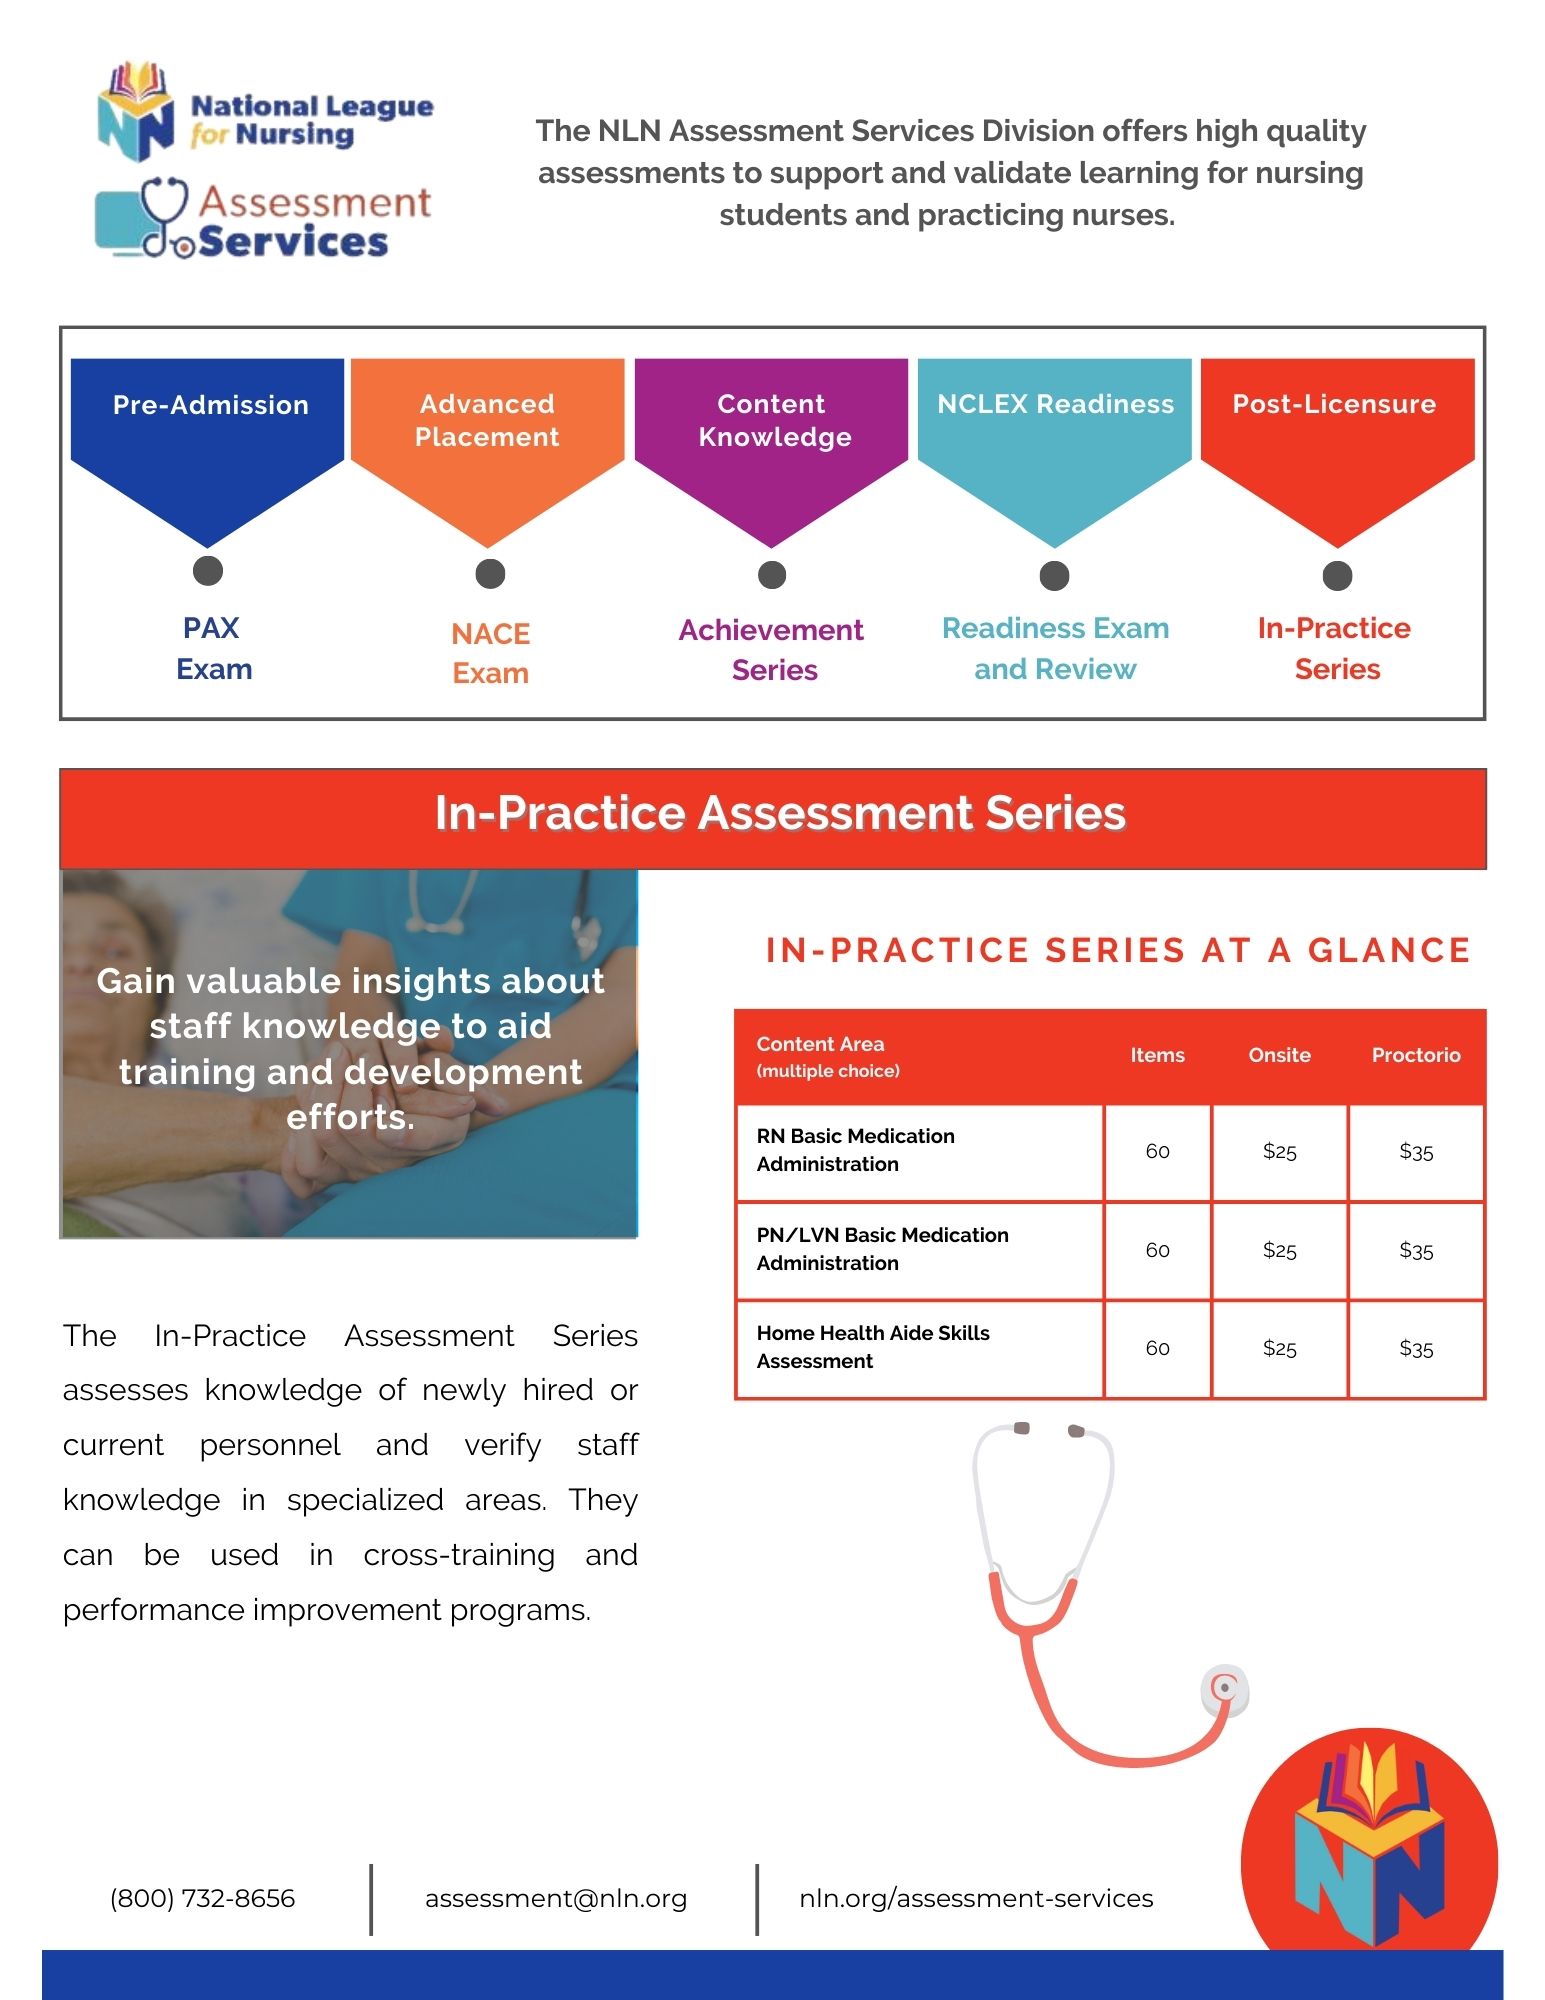 NLN Brochure_In-Practice Assessment Series_NEW PRICING_IMAGE for website